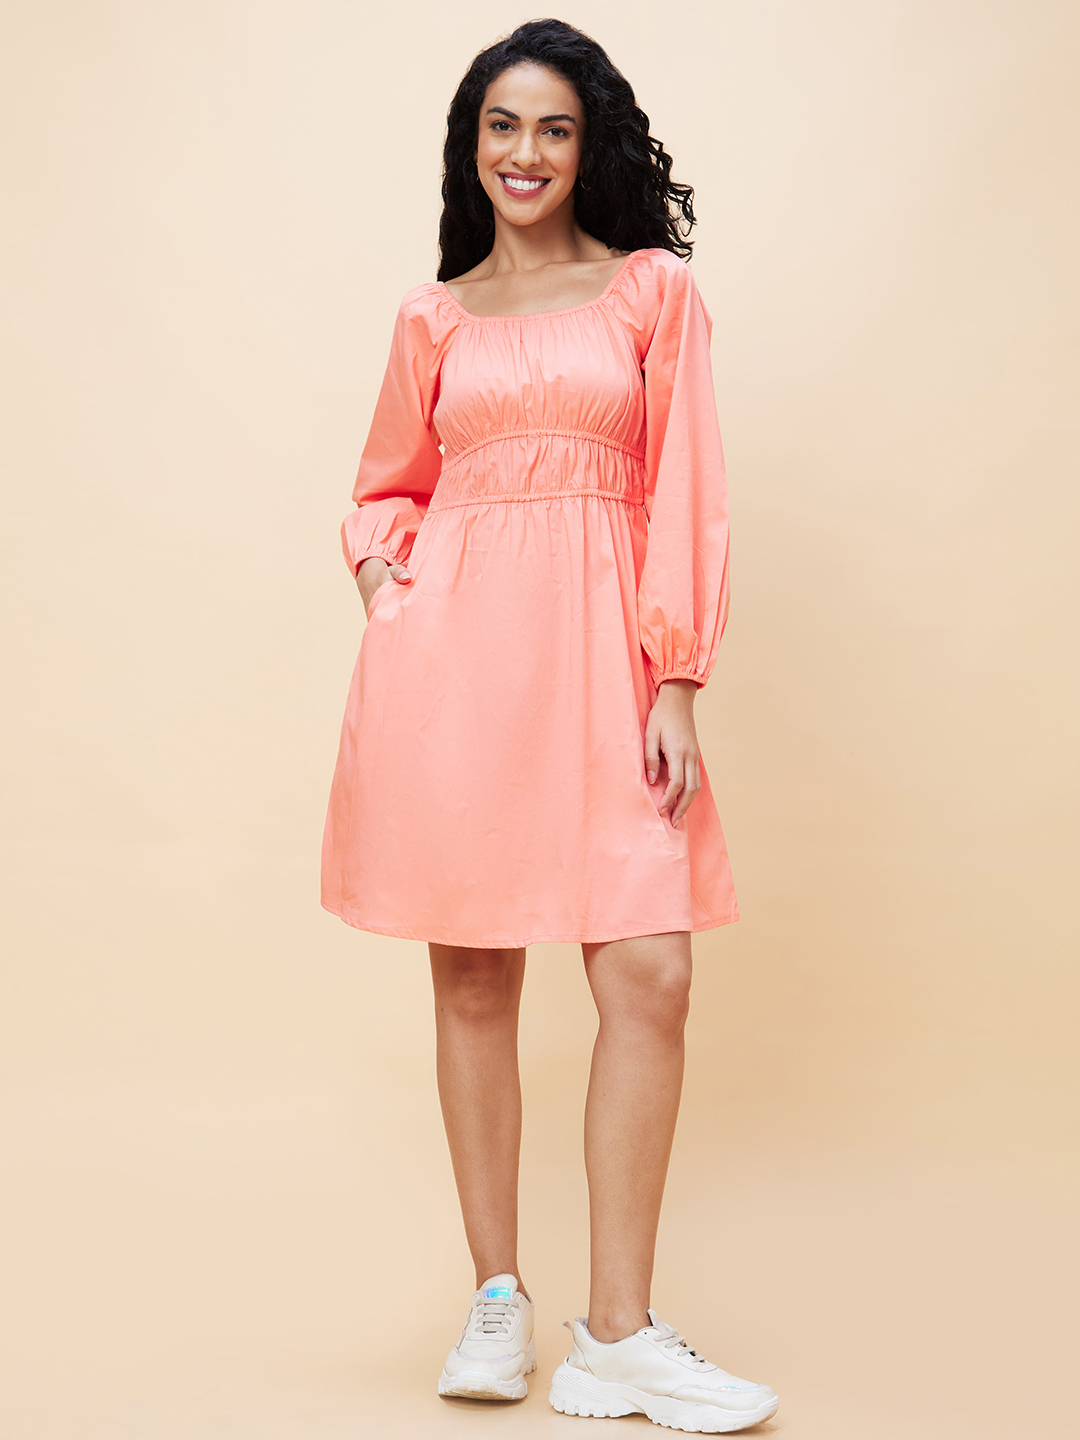 Globus Women Peach Solid Square Neck Casual Fit And Flare Dress